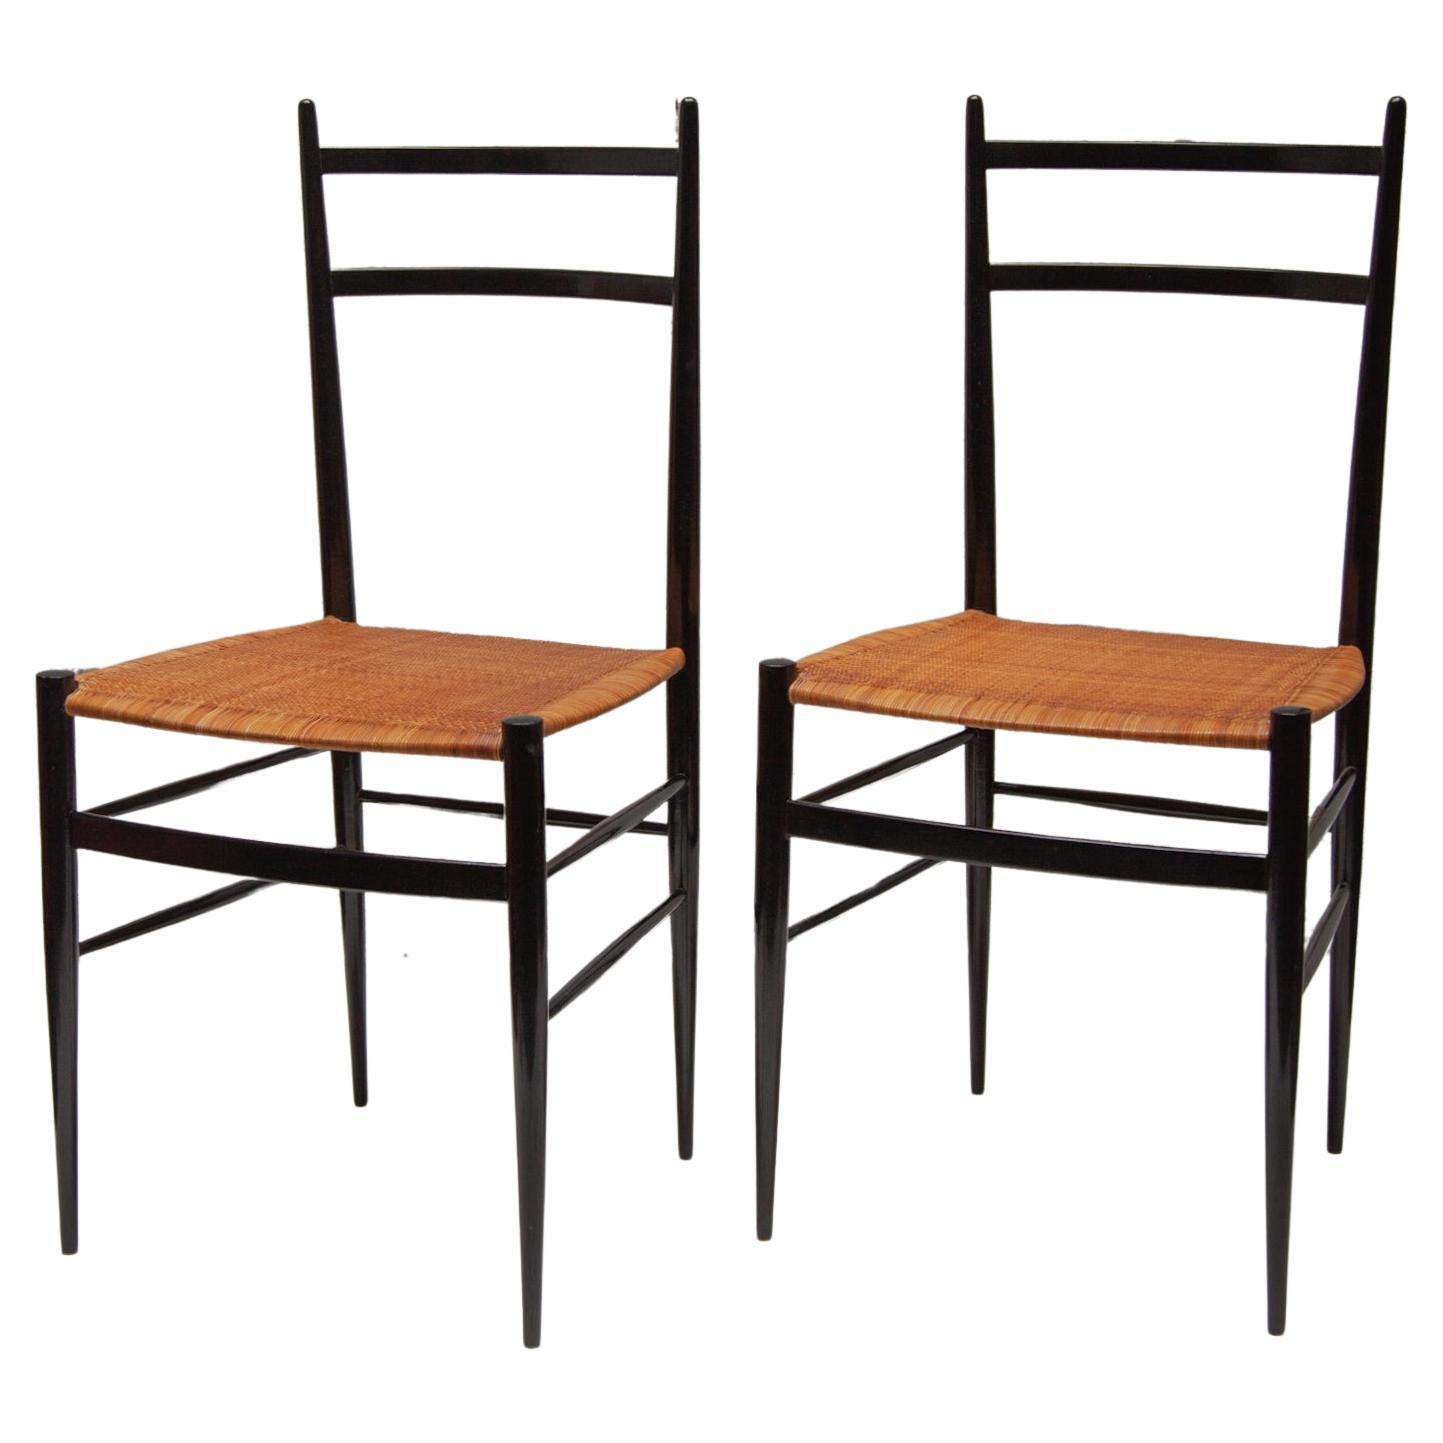 Set of Two Wicker "Chiavari" Chairs by Colombo Sanguineti, Italy, 1950